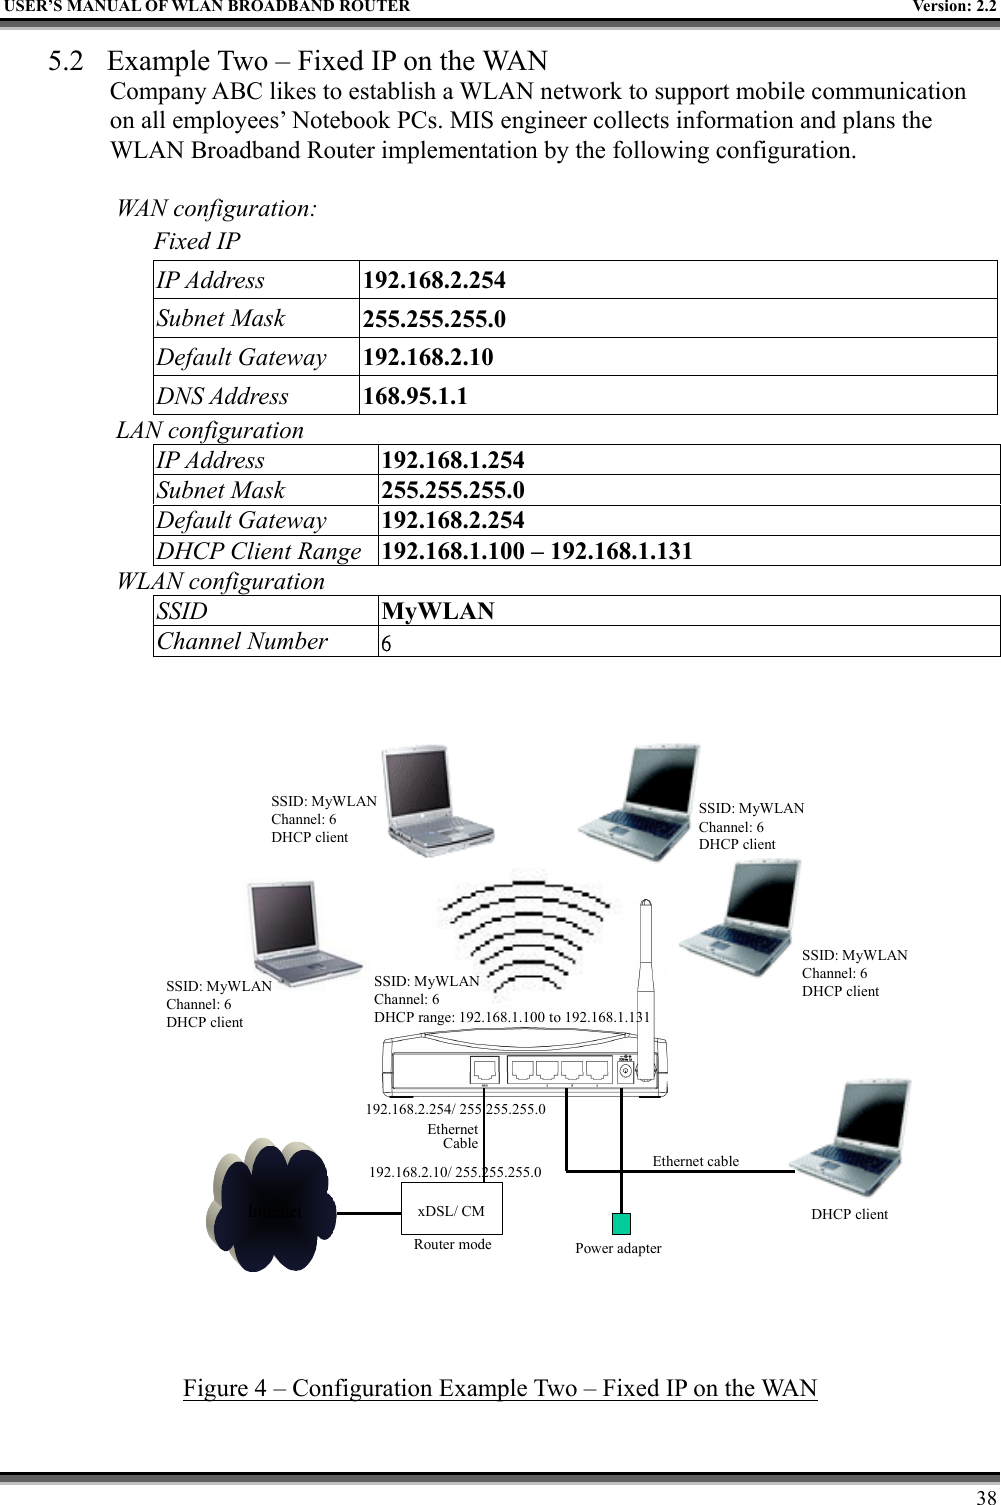   USER’S MANUAL OF WLAN BROADBAND ROUTER    Version: 2.2     38 5.2  Example Two – Fixed IP on the WAN Company ABC likes to establish a WLAN network to support mobile communication on all employees’ Notebook PCs. MIS engineer collects information and plans the WLAN Broadband Router implementation by the following configuration.  WAN configuration:   Fixed IP IP Address  192.168.2.254 Subnet Mask  255.255.255.0 Default Gateway  192.168.2.10 DNS Address  168.95.1.1 LAN configuration IP Address  192.168.1.254 Subnet Mask  255.255.255.0 Default Gateway  192.168.2.254 DHCP Client Range  192.168.1.100 – 192.168.1.131 WLAN configuration SSID  MyWLAN Channel Number  6 Internet xDSL/ CMPower adapterEthernetCableEthernet cableSSID: MyWLANChannel: 6 DHCP clientSSID: MyWLANChannel: 6 DHCP clientSSID: MyWLANChannel: 6 DHCP clientSSID: MyWLANChannel: 6 DHCP clientDHCP clientRouter modeSSID: MyWLANChannel: 6DHCP range: 192.168.1.100 to 192.168.1.131192.168.2.10/ 255.255.255.0192.168.2.254/ 255.255.255.0 Figure 4 – Configuration Example Two – Fixed IP on the WAN  